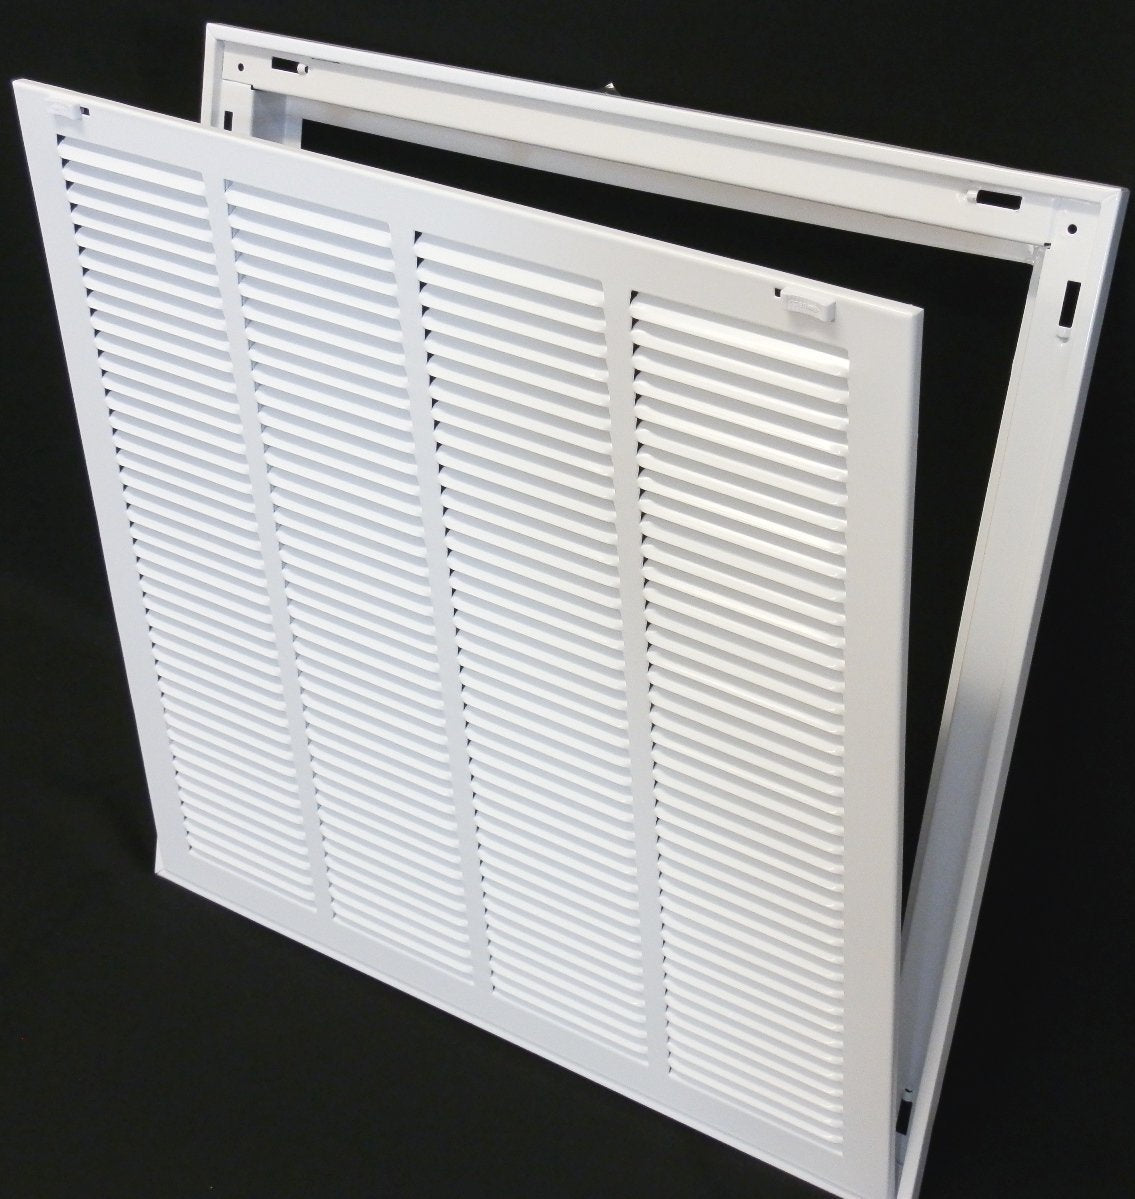 18&quot; X 22&quot; Steel Return Air Filter Grille for 1&quot; Filter - Removable Frame - [Outer Dimensions: 20 5/8&quot; X 24 5/8&quot;]